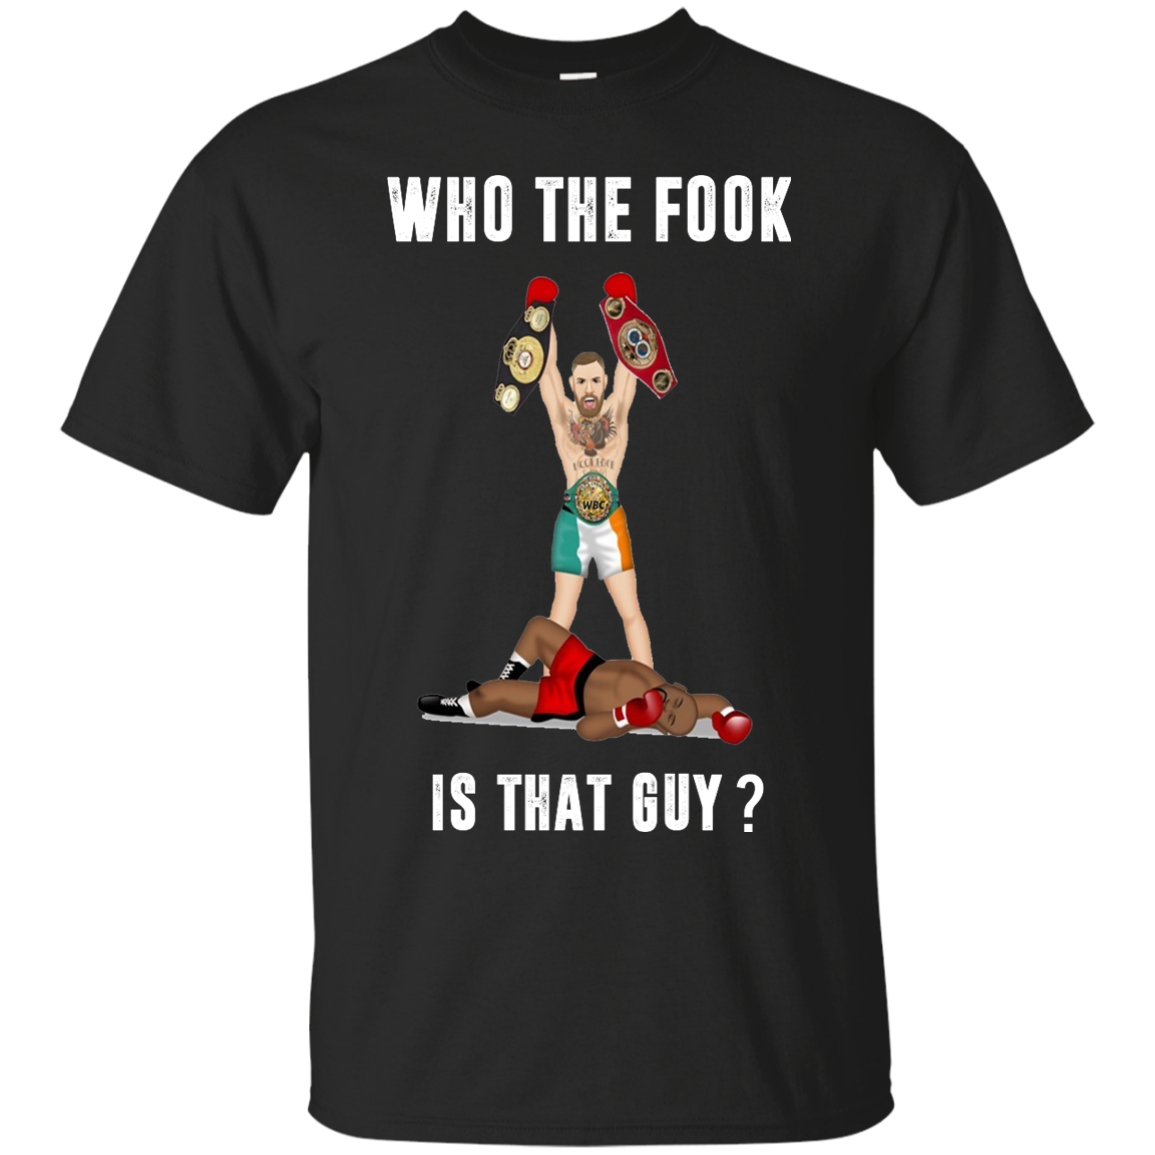 Floyd Mayweather vs Conor McGregor: Who The Fook Is That Guy T-Shirts, Hoodies